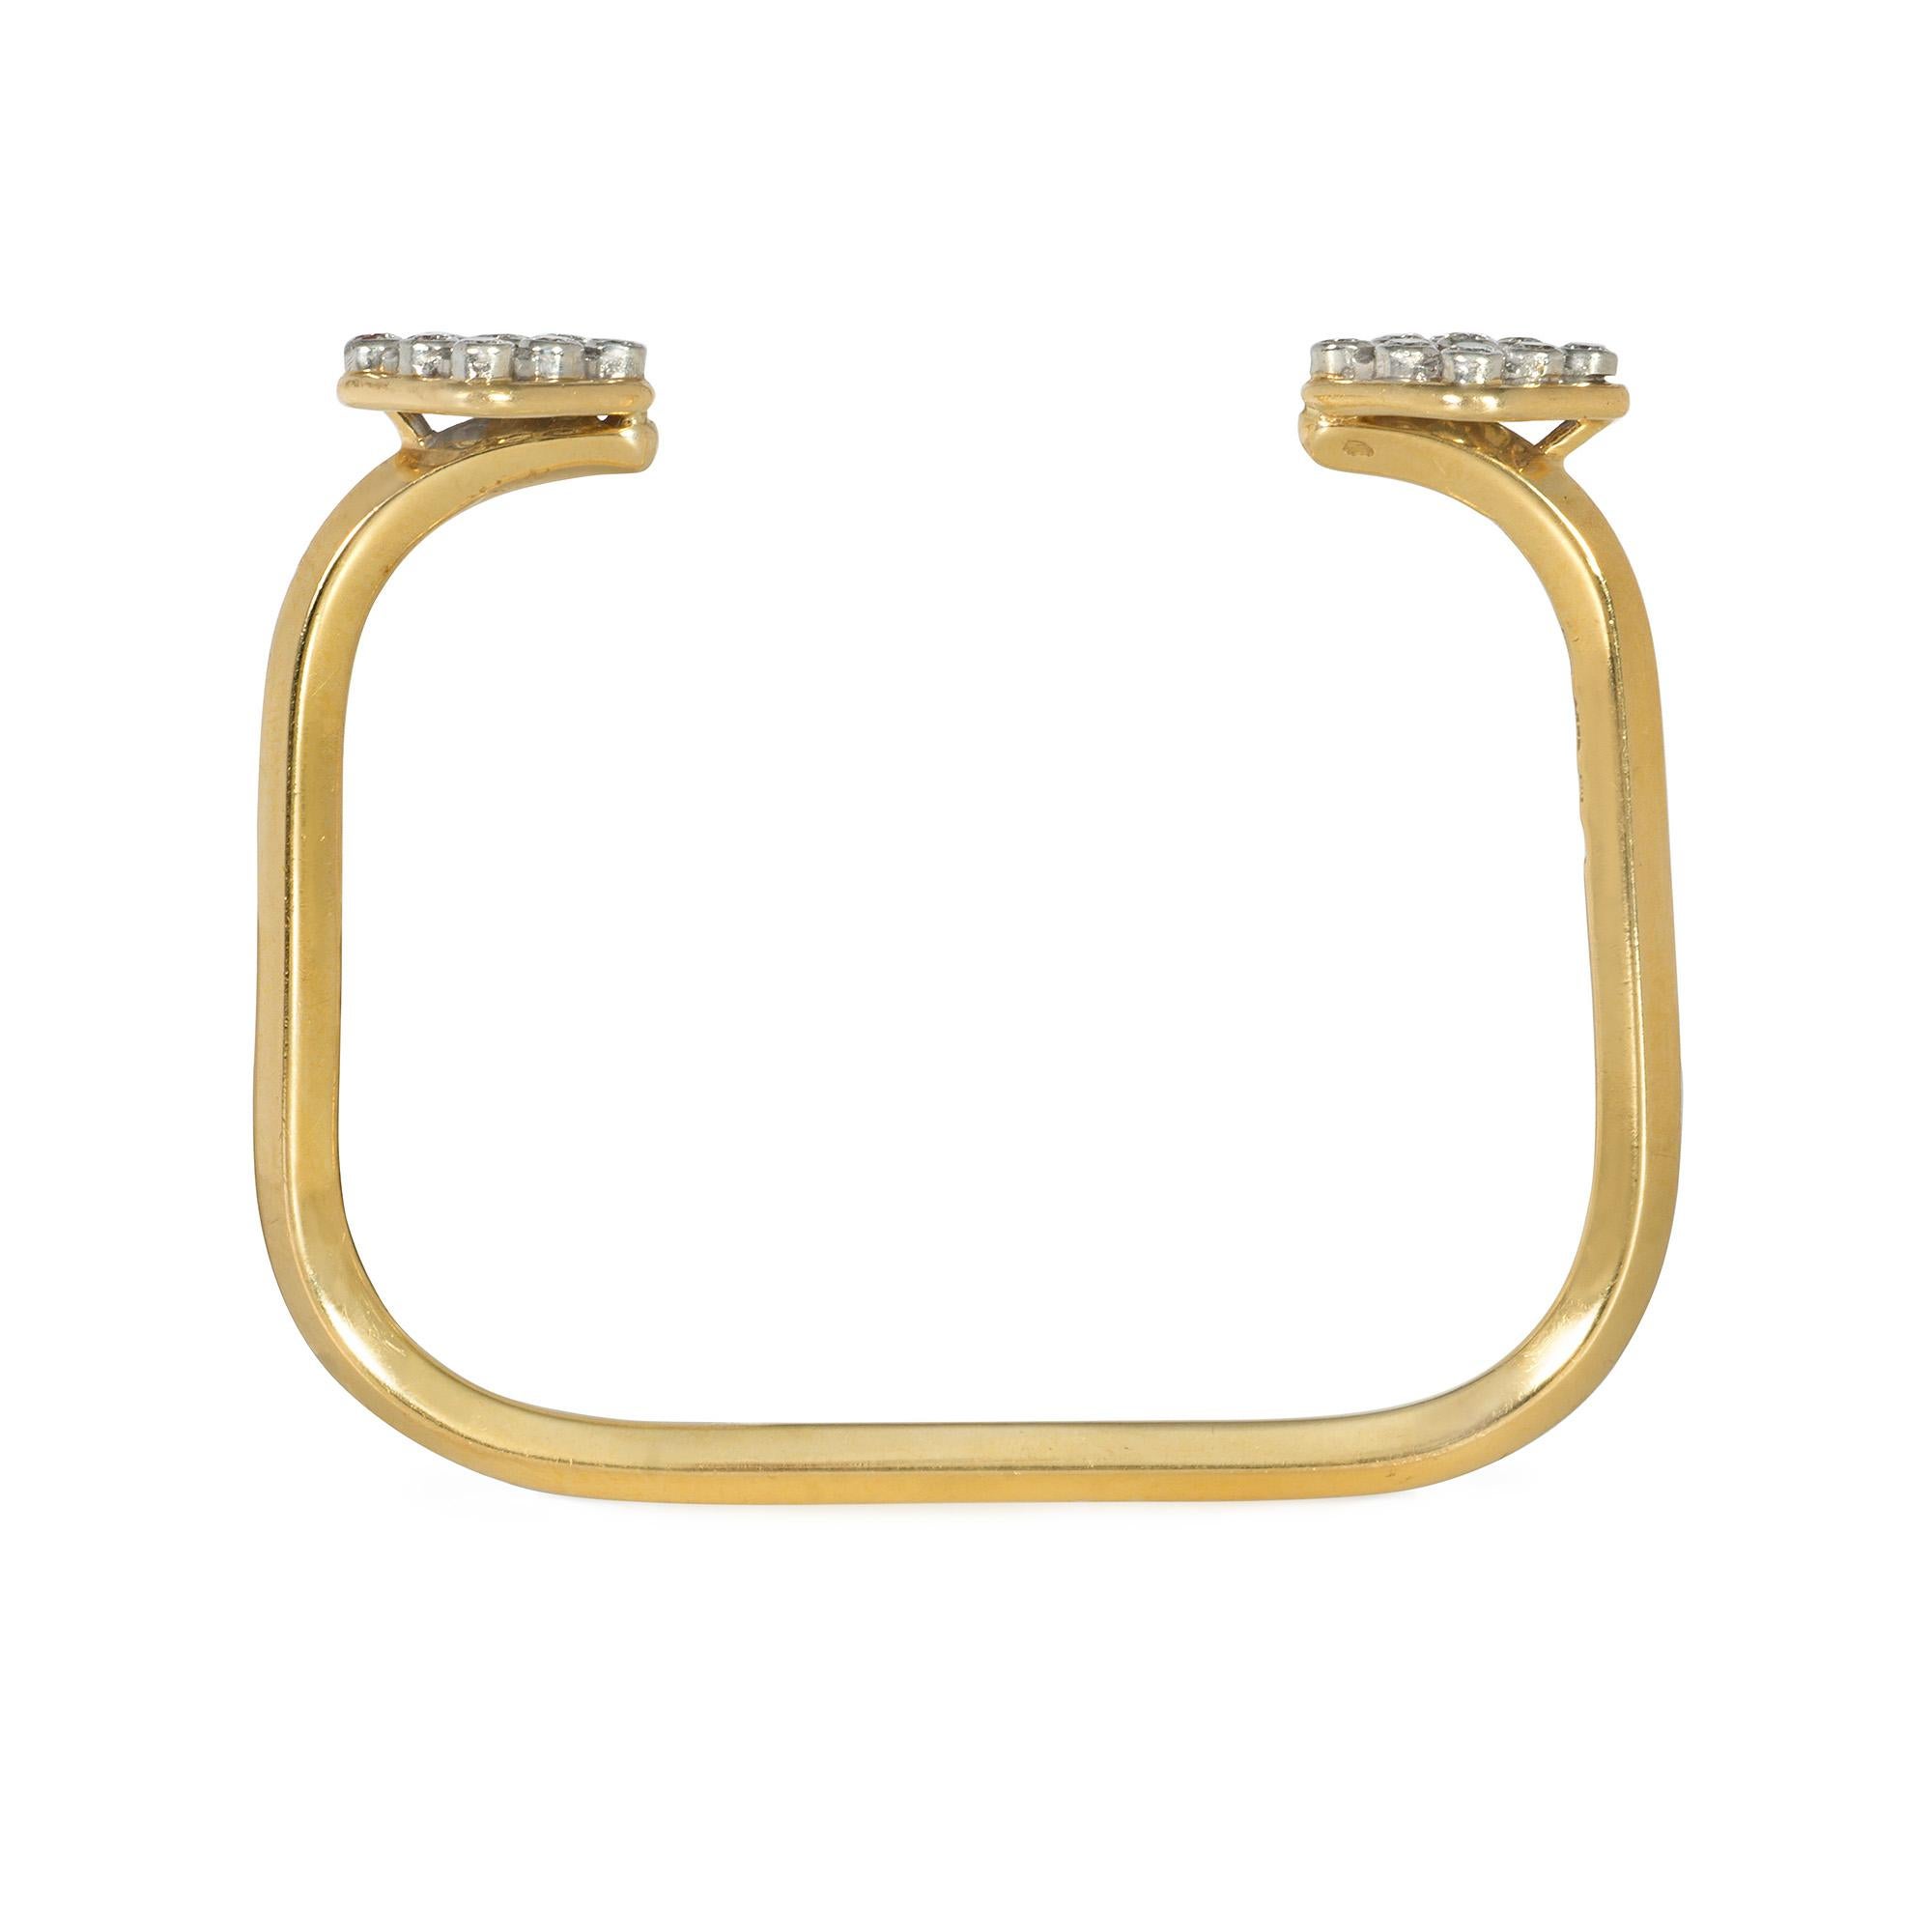 Modernist French 1970s Gold Geometric Cuff Bracelet with Diamond-Set Terminals For Sale